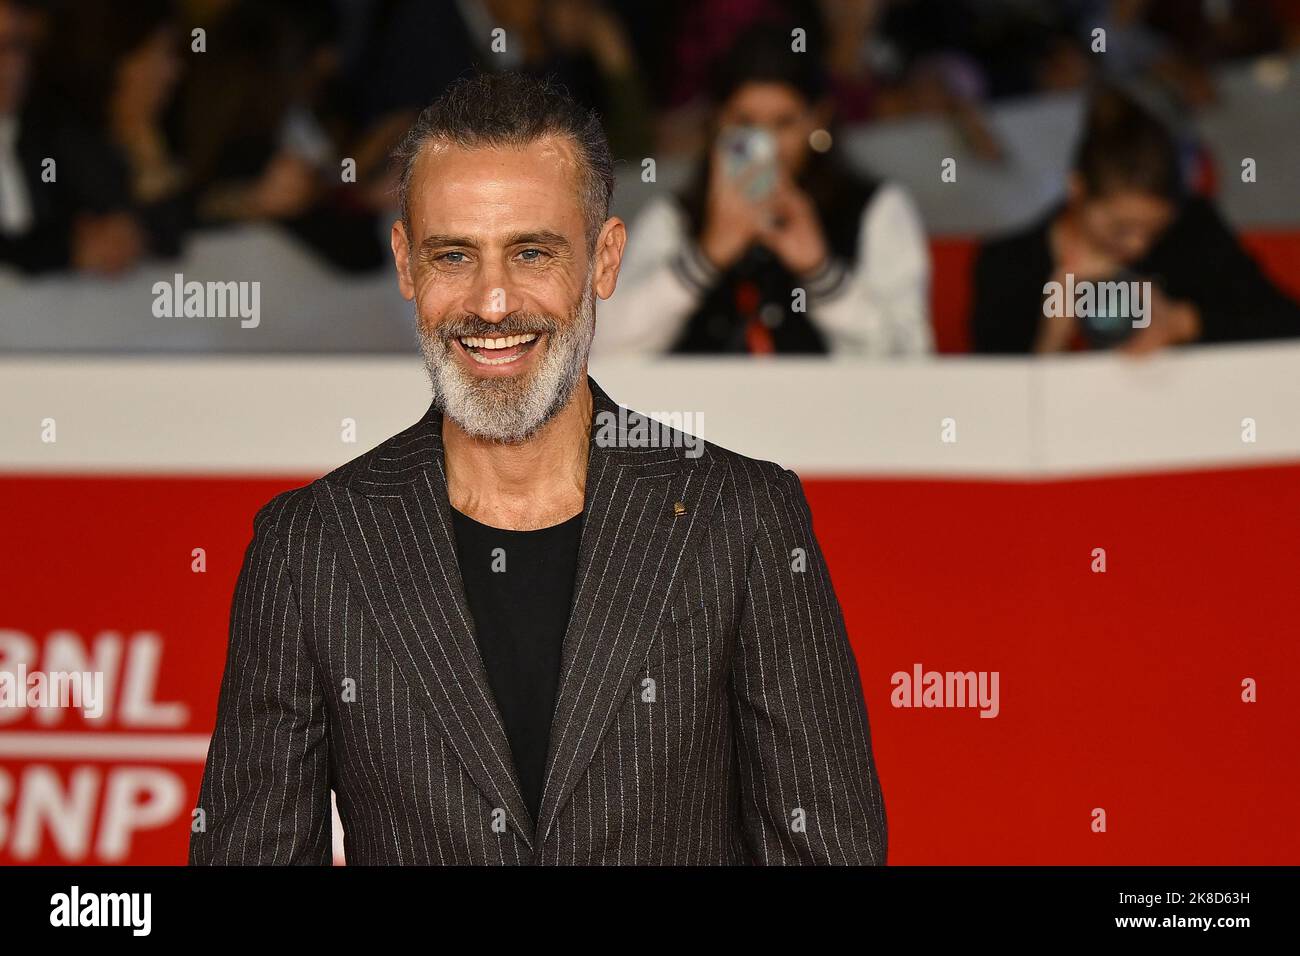 Rome, Italy - October 22: Raz Degan attends the Red Carpet during the 17th Rome Film Festival at Auditorium Parco della Musica on October 22, 2022 In Rome, Italy. Stock Photo